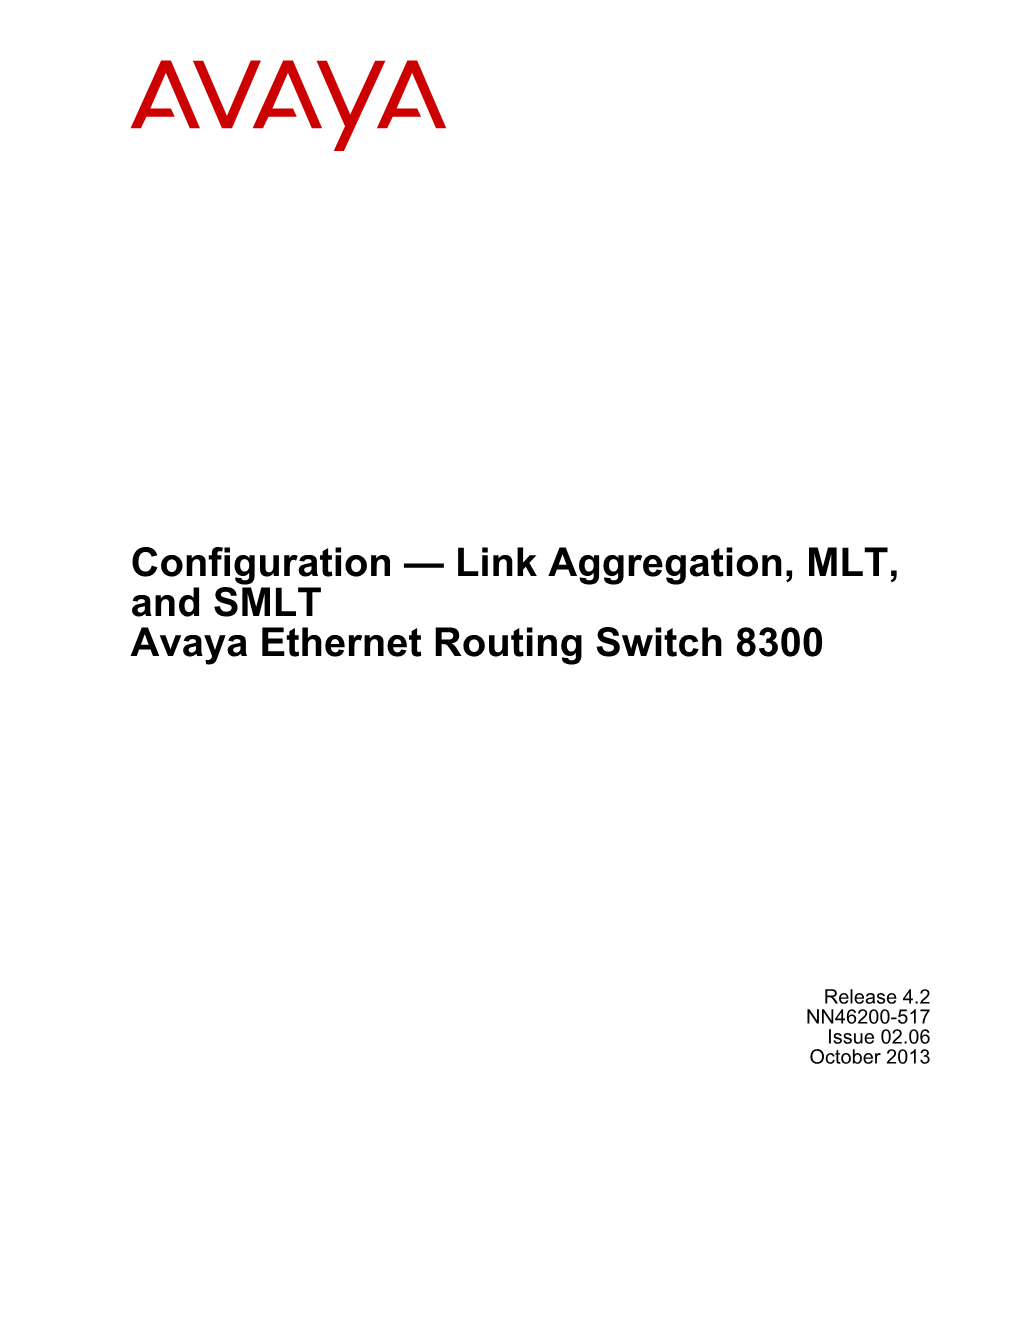 Link Aggregation, MLT, and SMLT Avaya Ethernet Routing Switch 8300